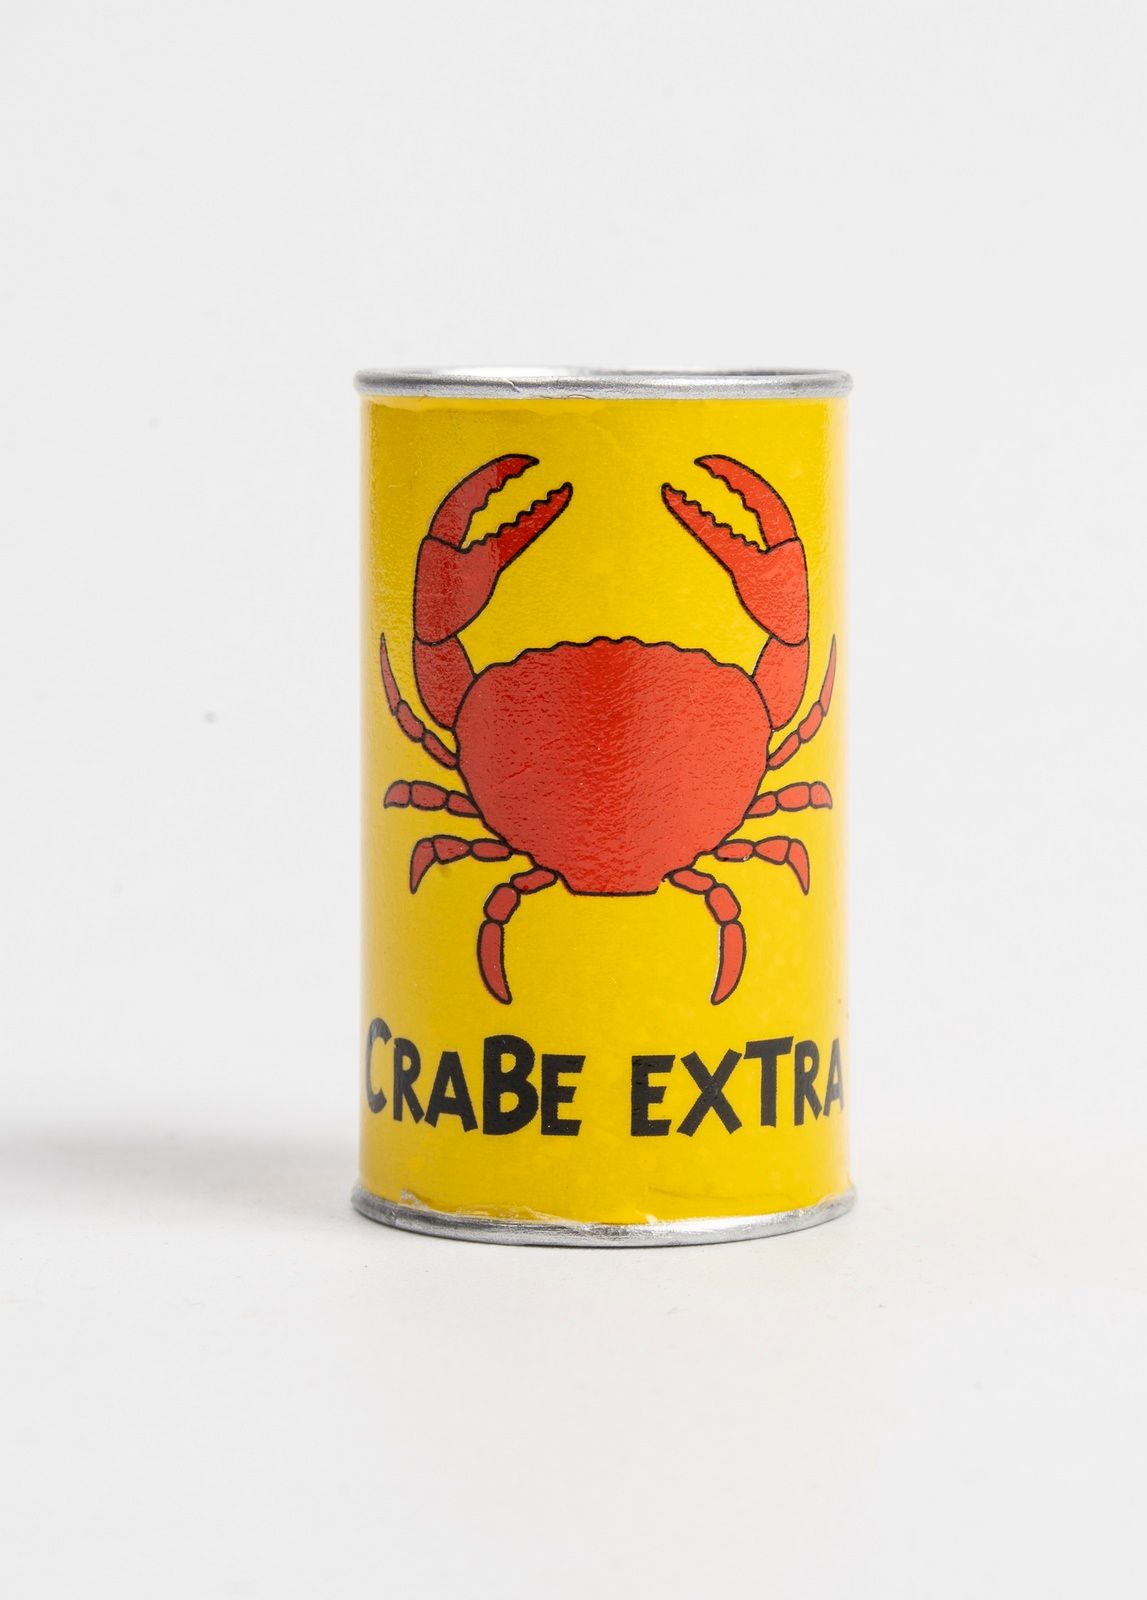 Null The Crab with Golden Claws



HERGE / MOULINSART



Collection: HERGÉ: The &hellip;